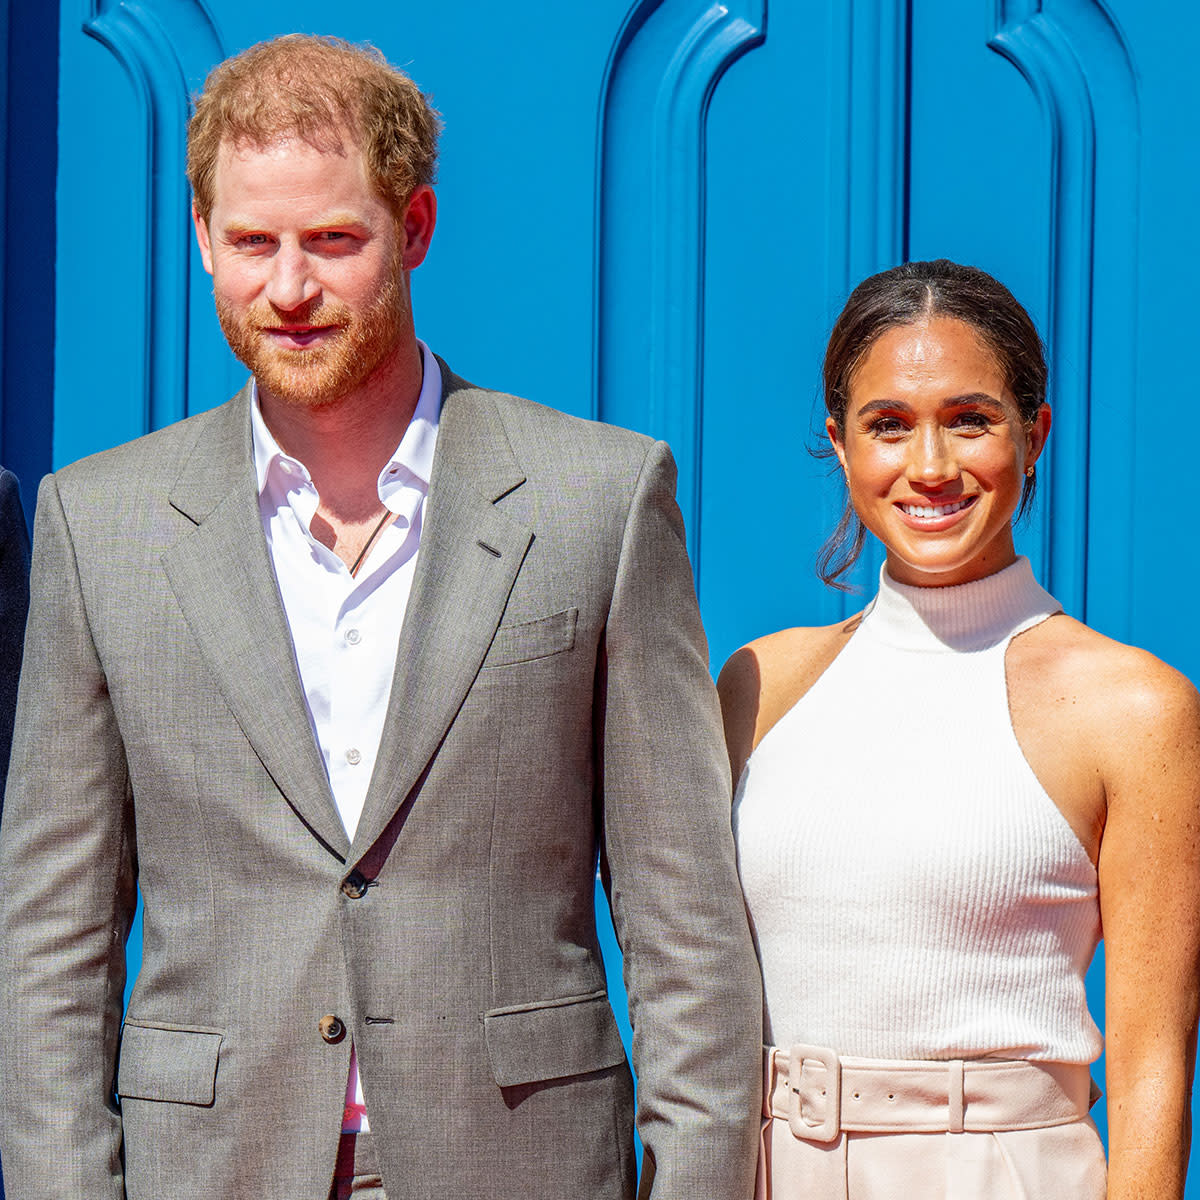 Prince Harry and Meghan Markle at Market Square in Dusseldorf, Germany